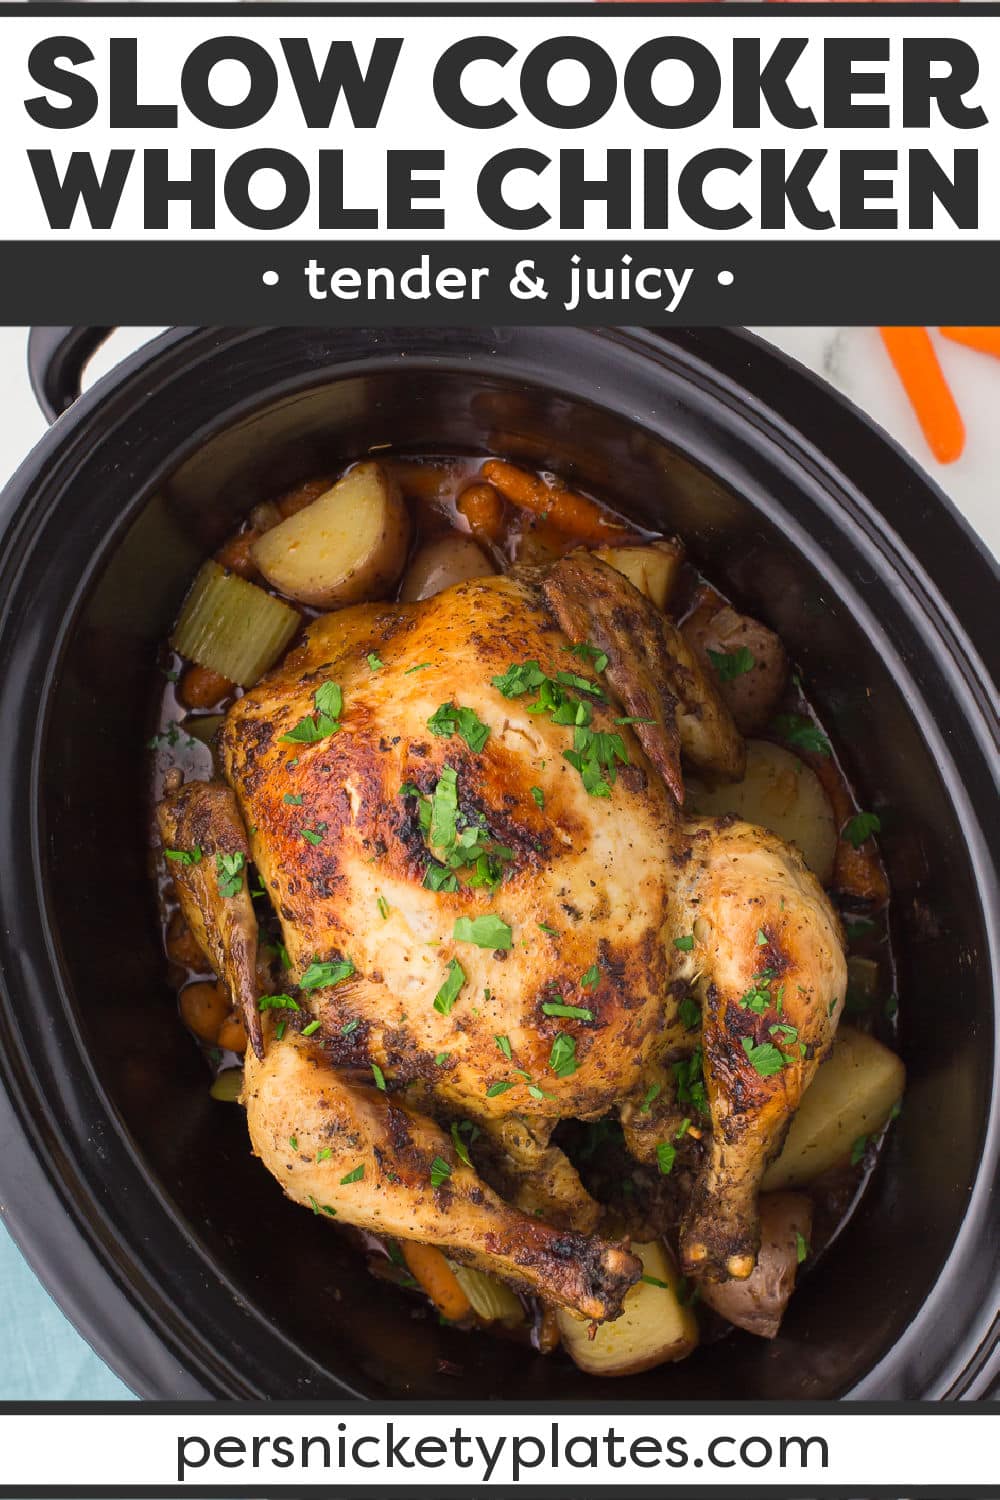 Make this easy slow cooker whole chicken when you want a complete dinner ready at the end of your day with very little effort. Tender, juicy whole chicken is seasoned to perfection and then cooked low and slow in the crock pot with chunky veggies that absorb all of those flavorful juices. Plus, you have the option of broiling it for crispy skin and making gravy from the drippings. This complete meal is one your whole family will love! | www.persnicketyplates.com